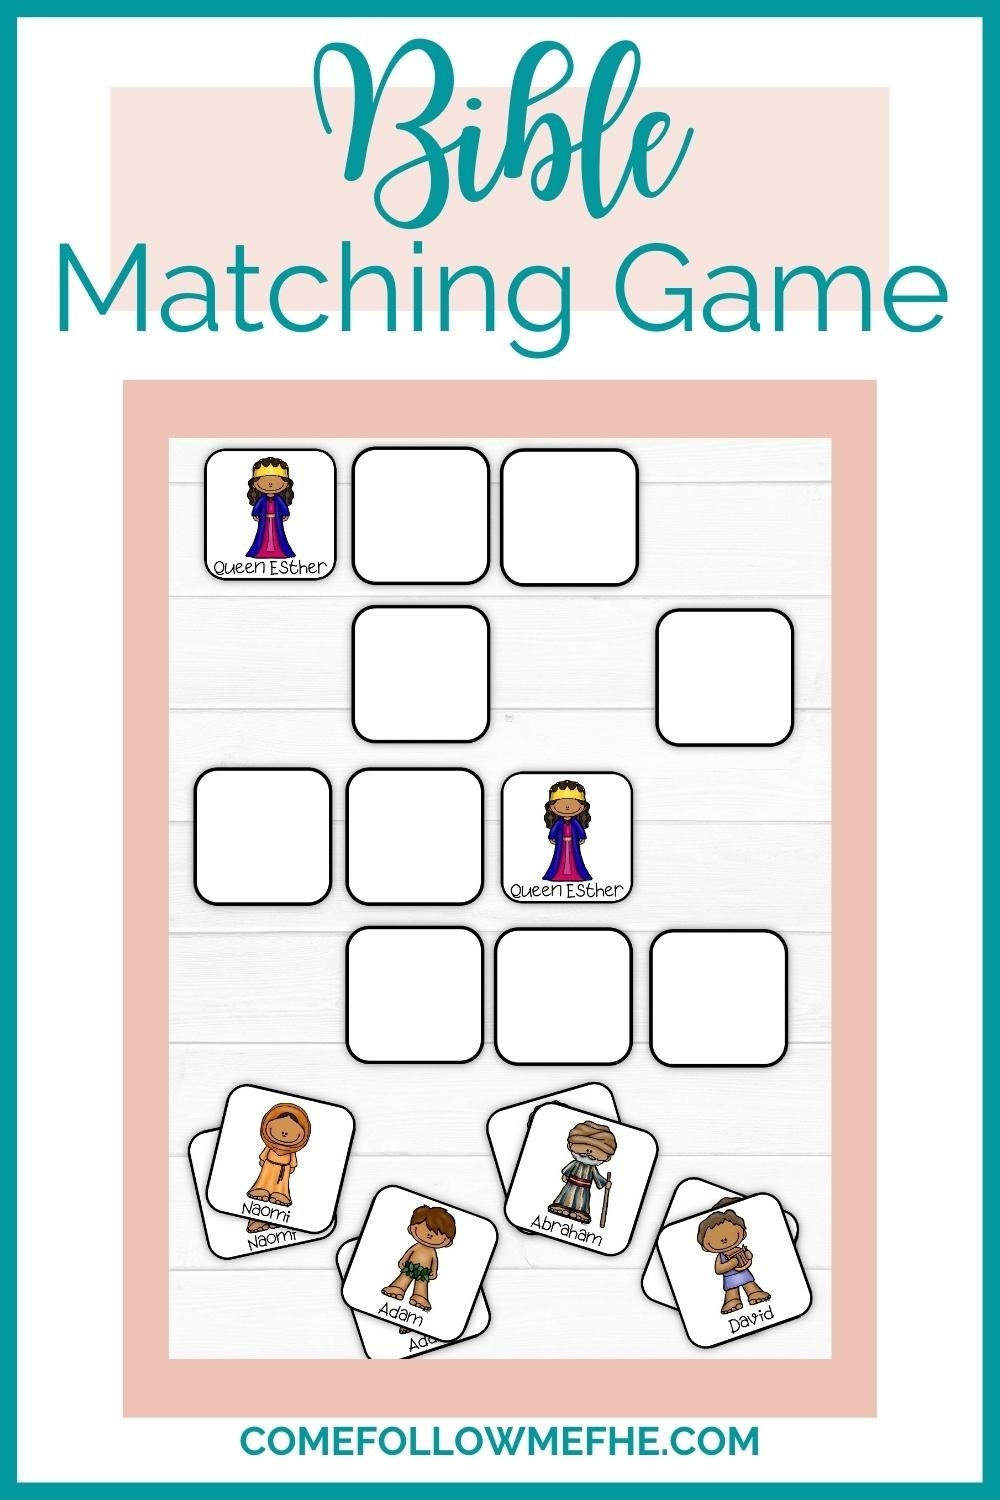 Bible Character Matching Game Come Follow Me FHE Matching Games Bible Characters Bible Printables